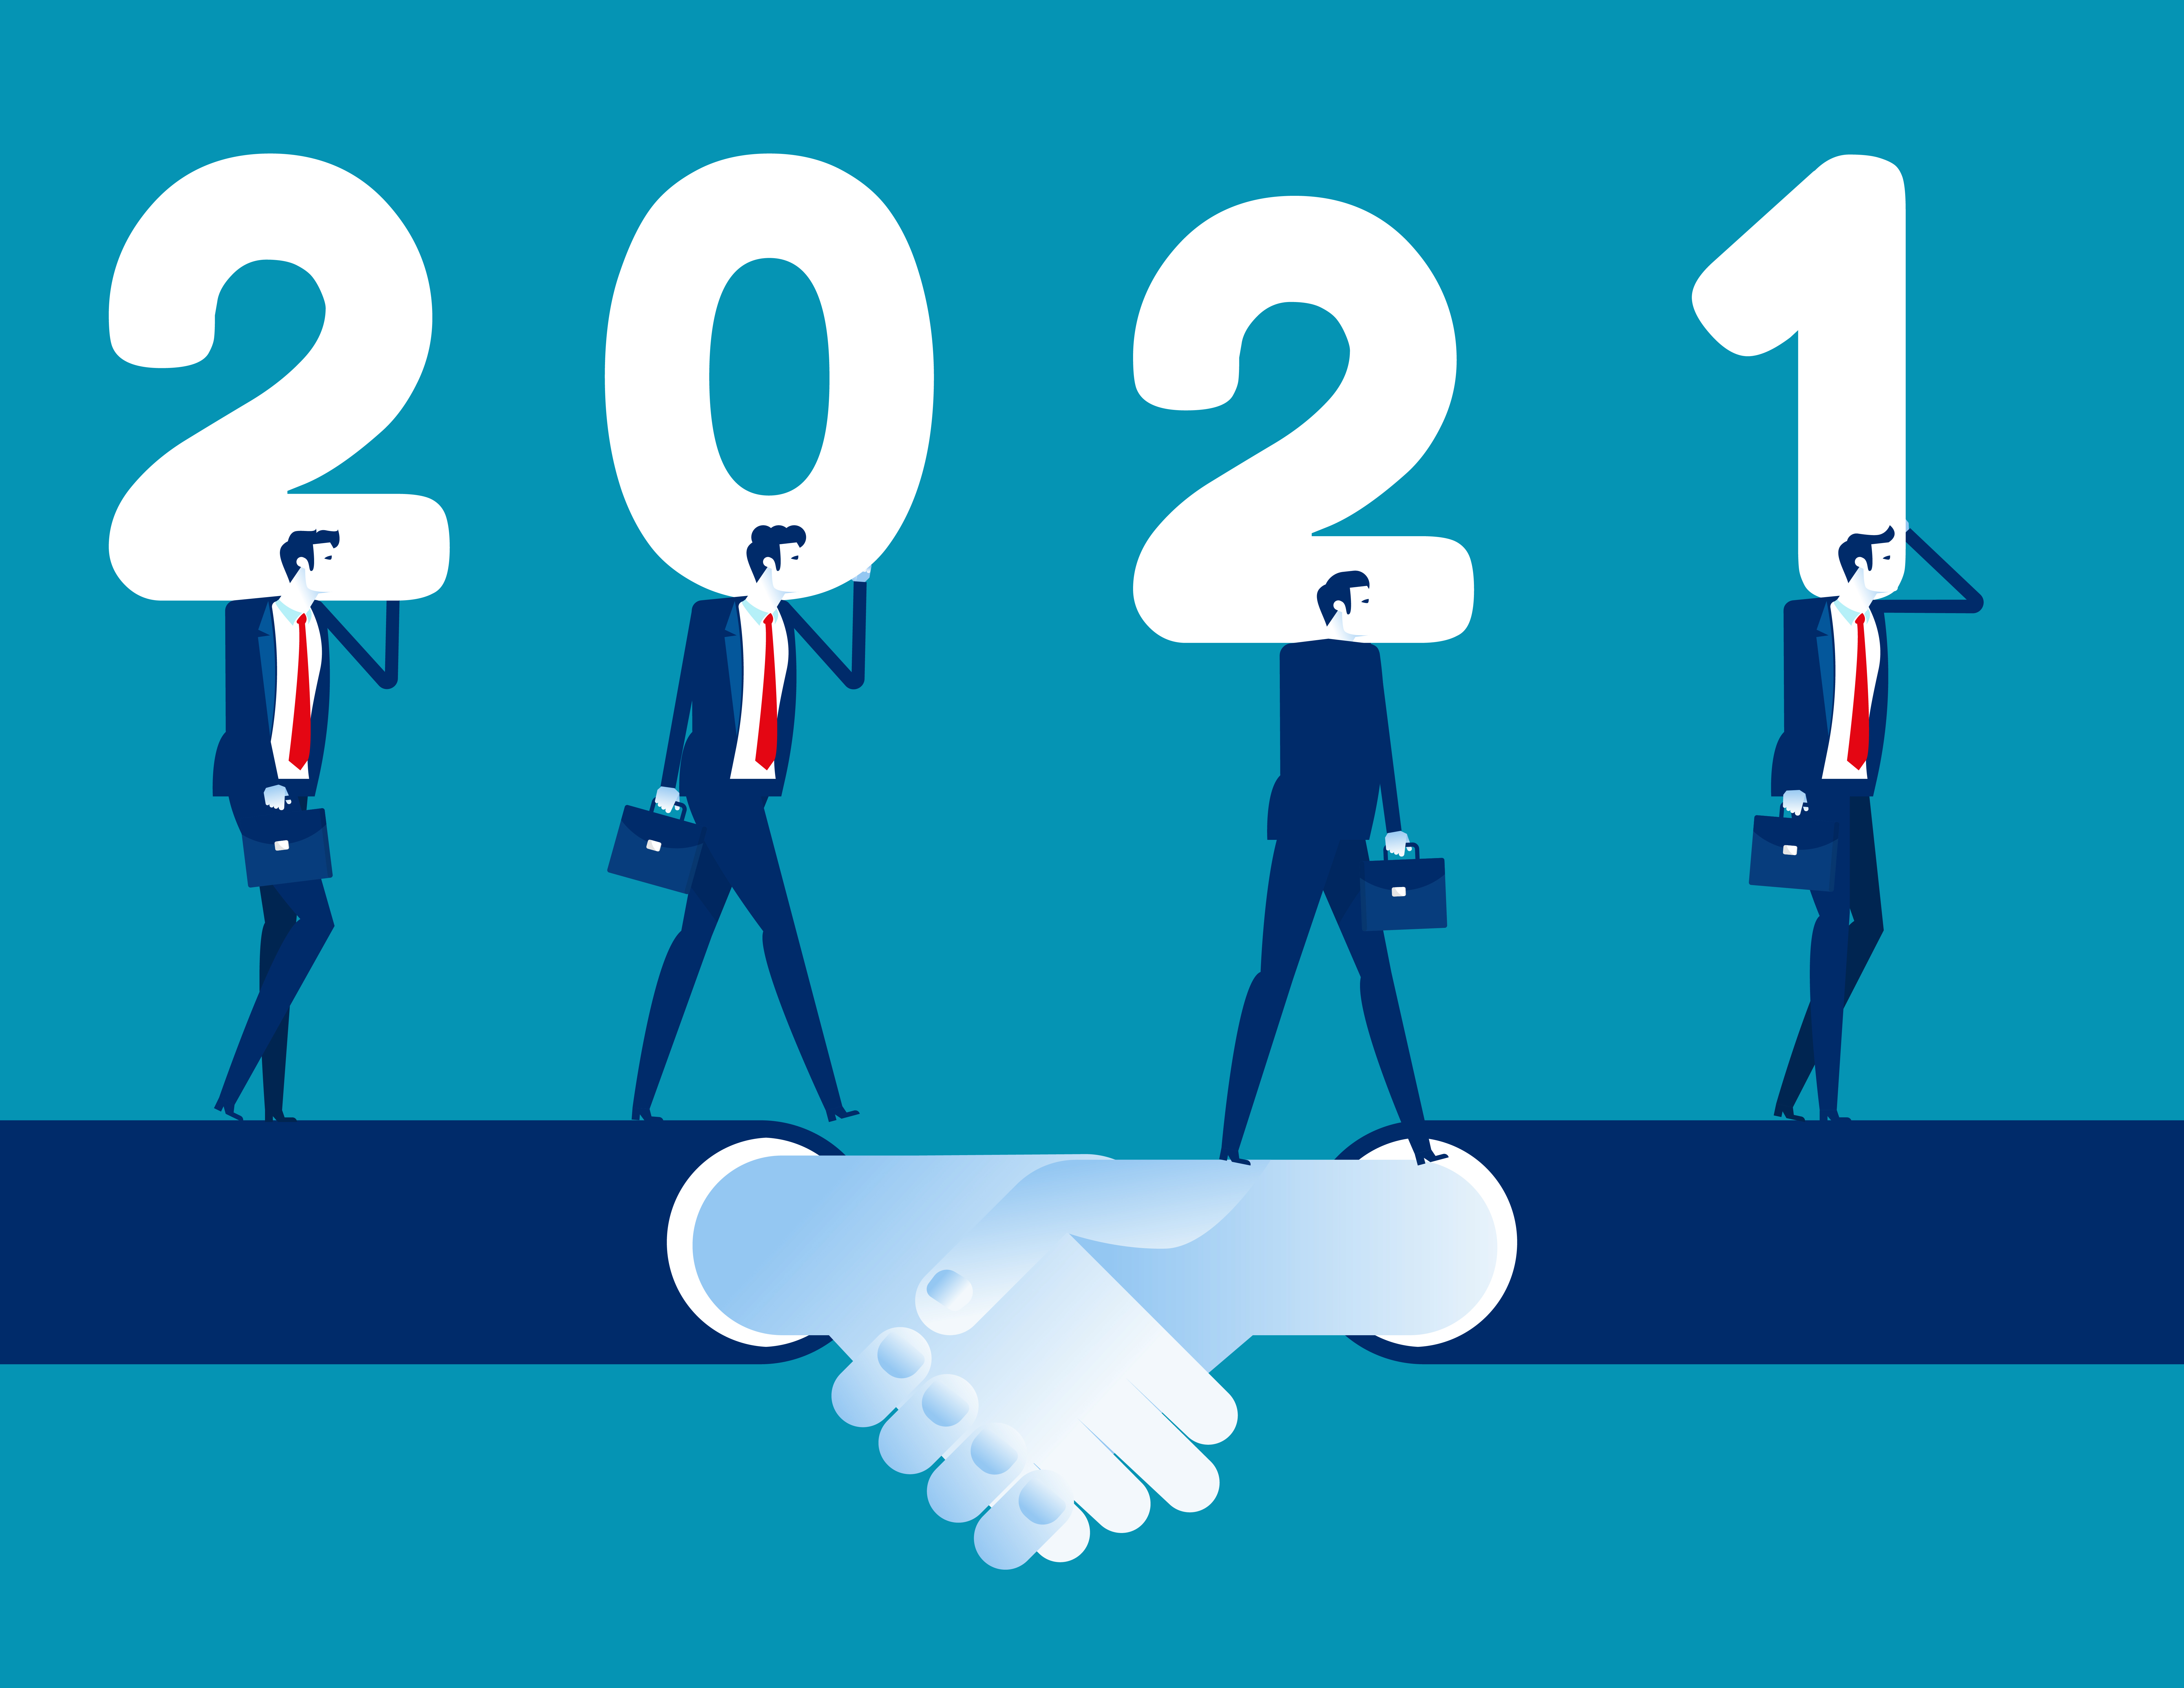 Business team walk together on shaking hand and hold number 2021